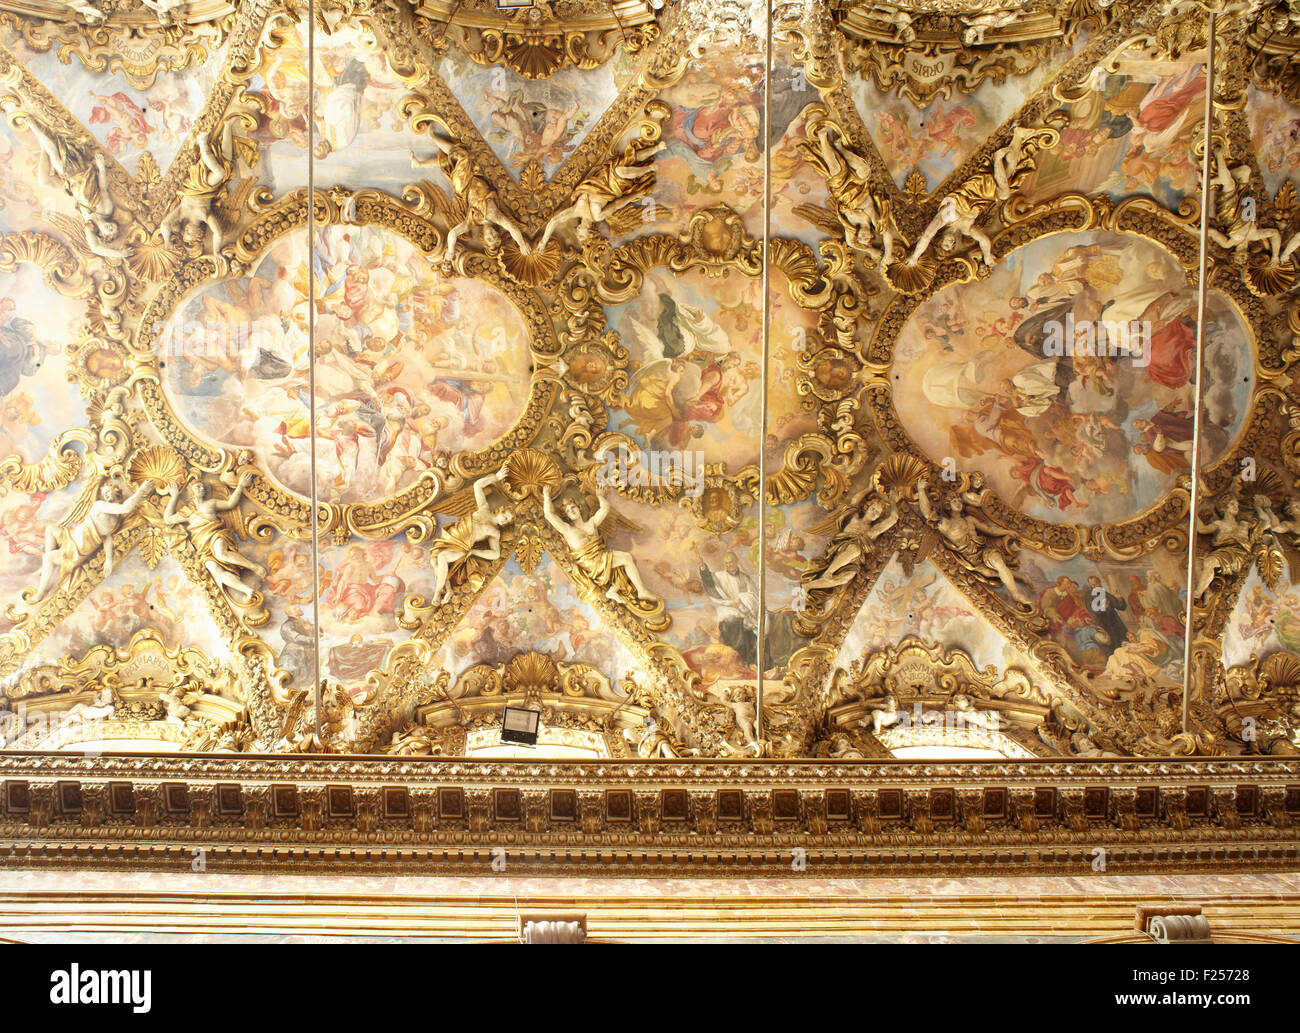 Frescoed ceiling, Palermo cathedral - Itly Stock Photo